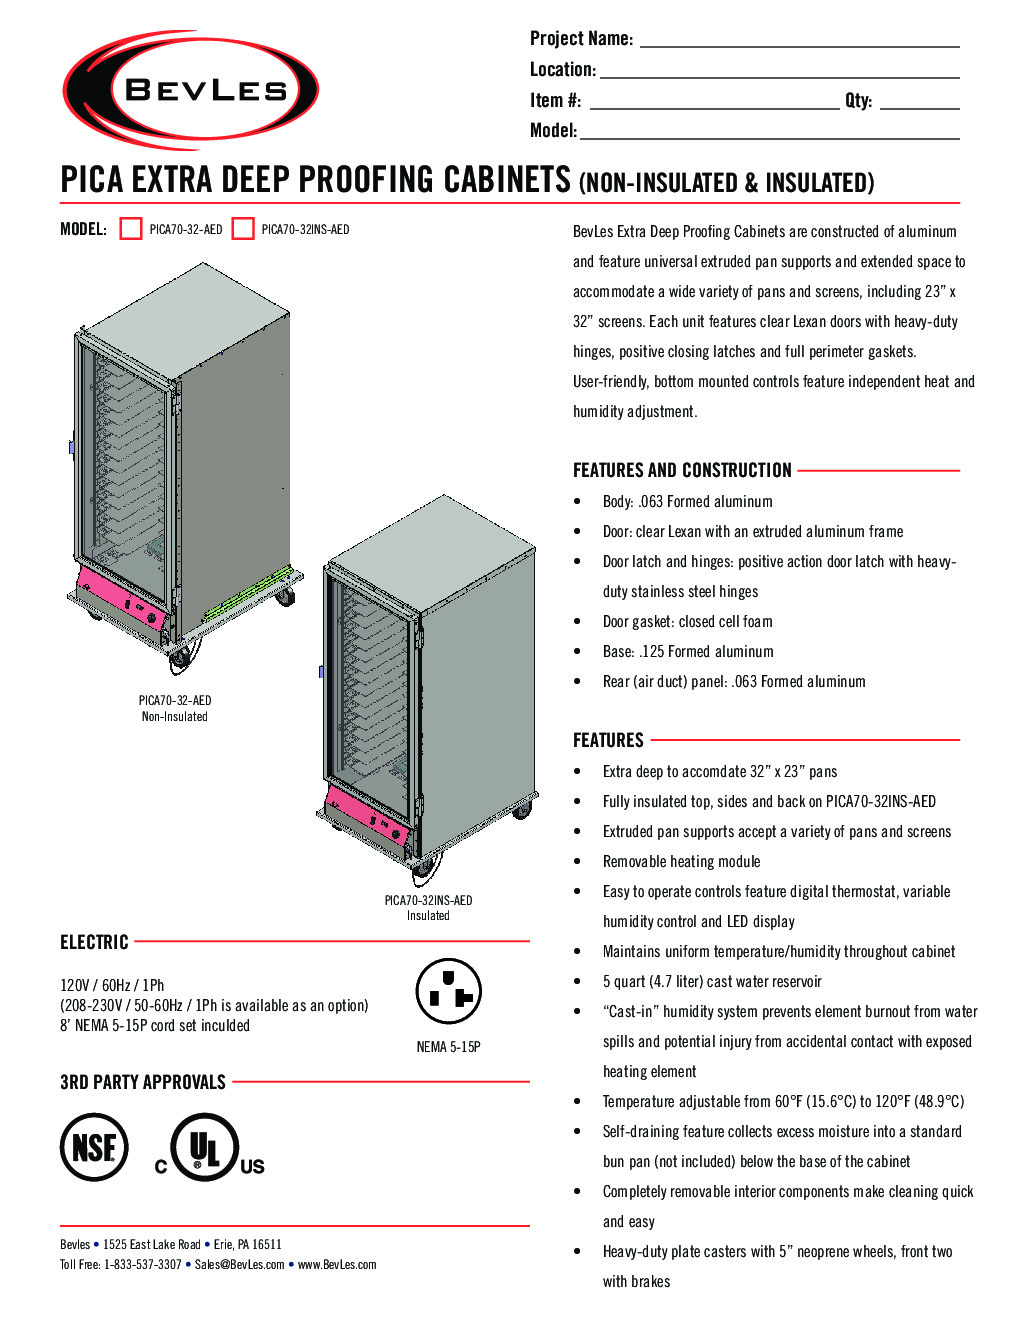 BevLes Company PICA70-32INS-AED-1L2 Mobile Proofer Cabinet